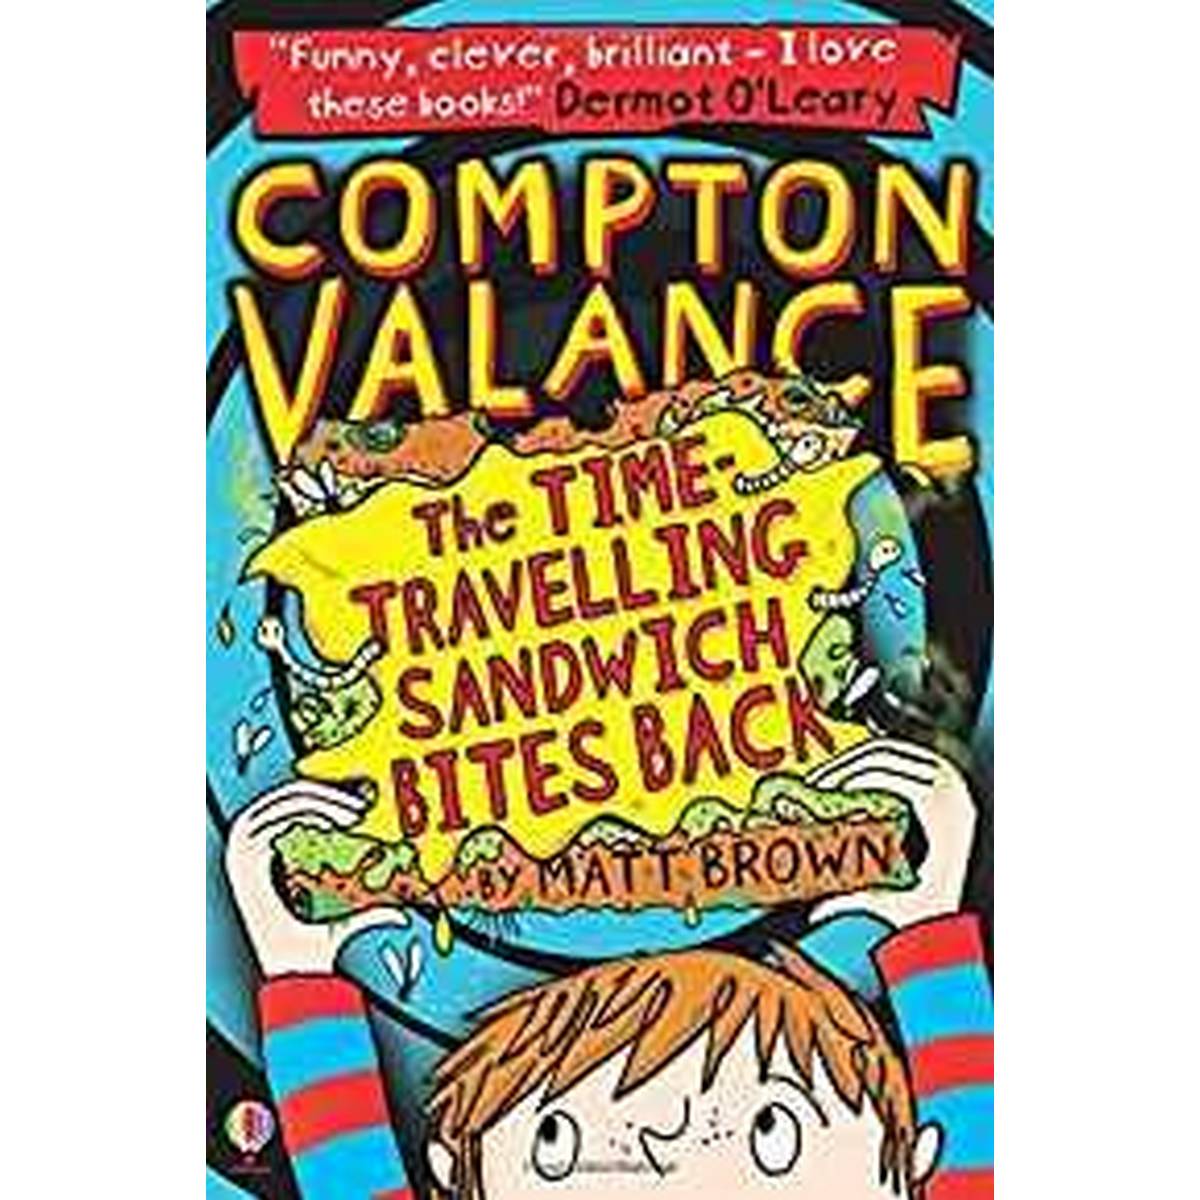 Compton Valance The Time-Travelling Sandwich Bites Back: Book 2